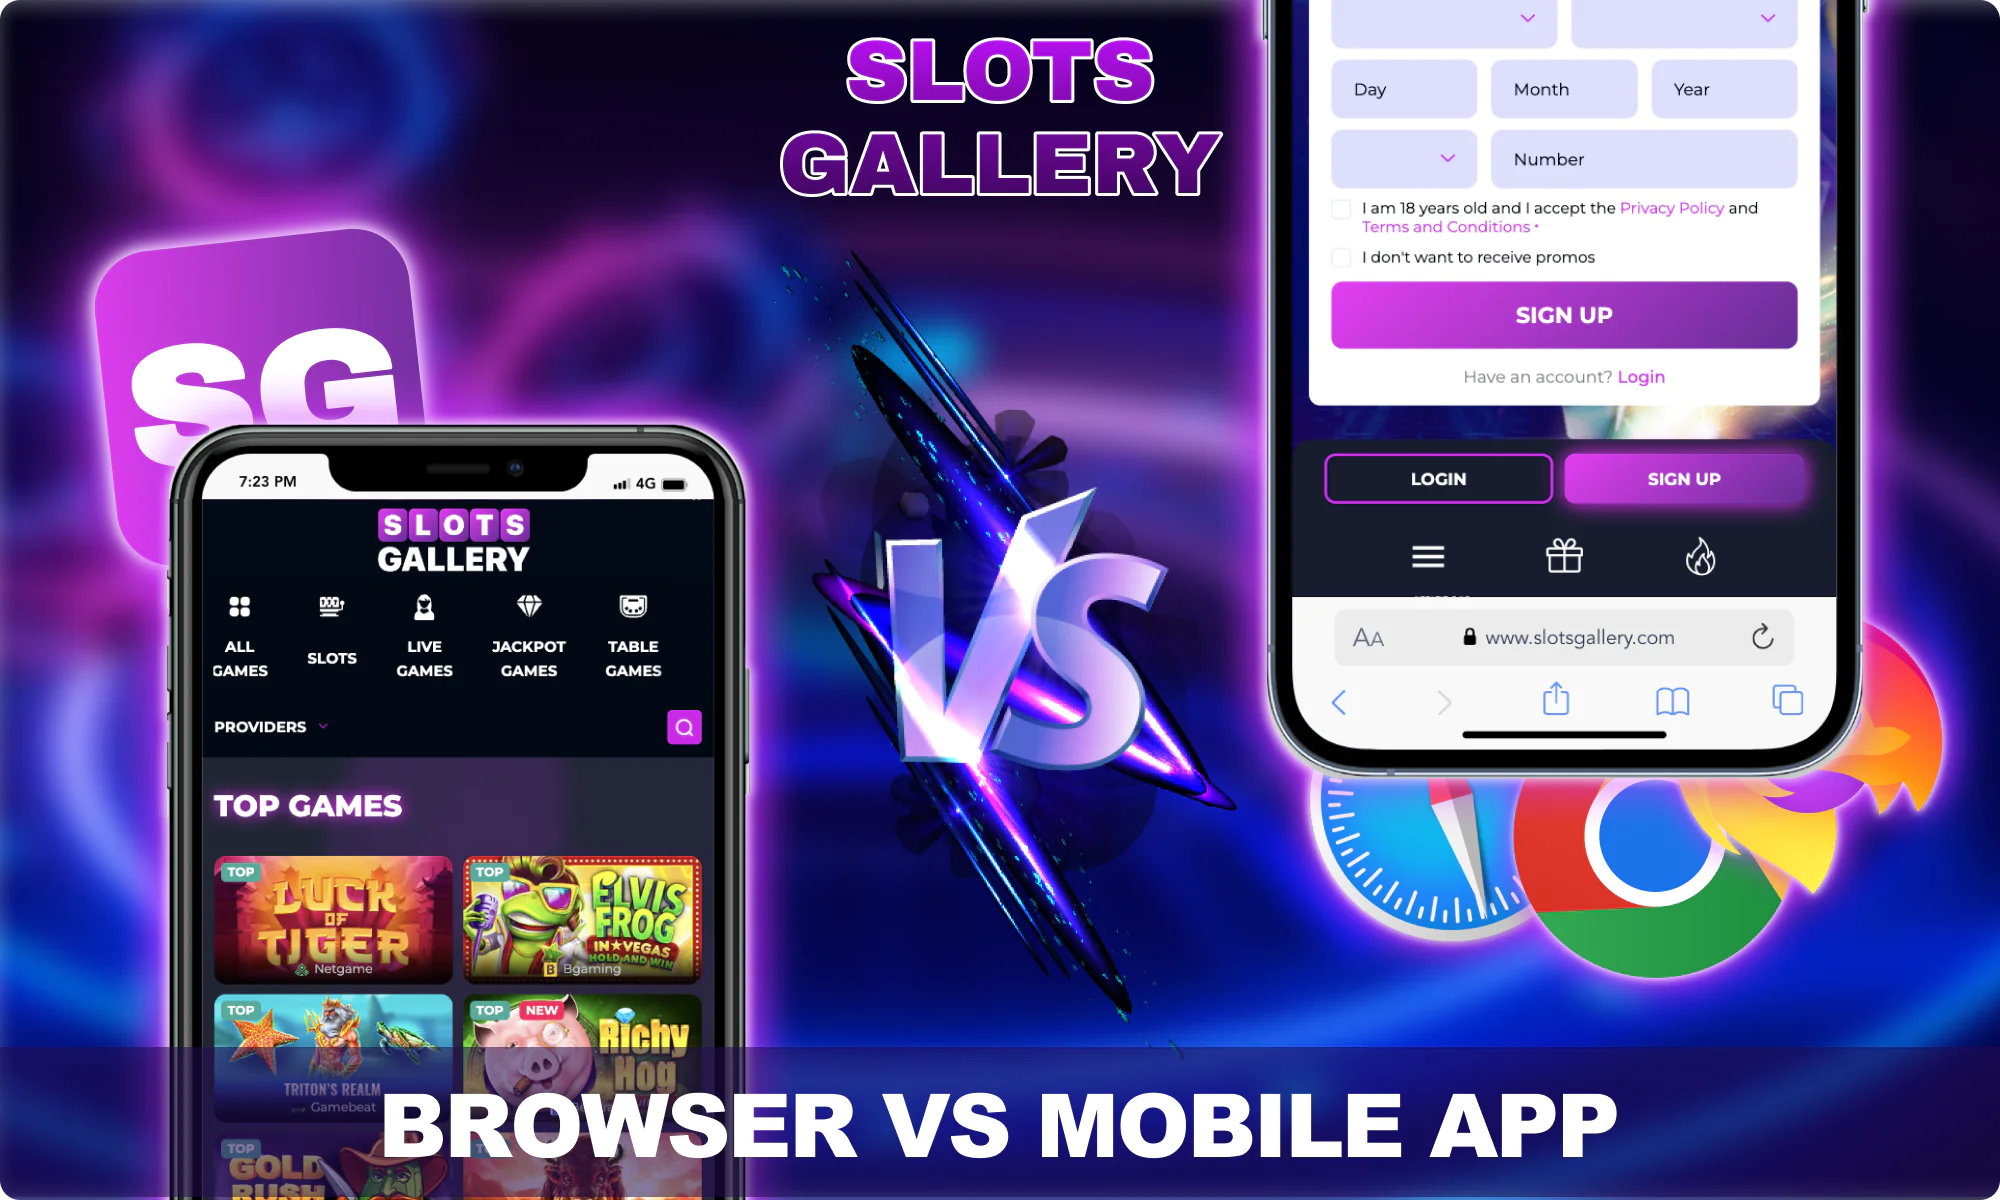 What to choose - Slots Gallery Mobile App or Browser?